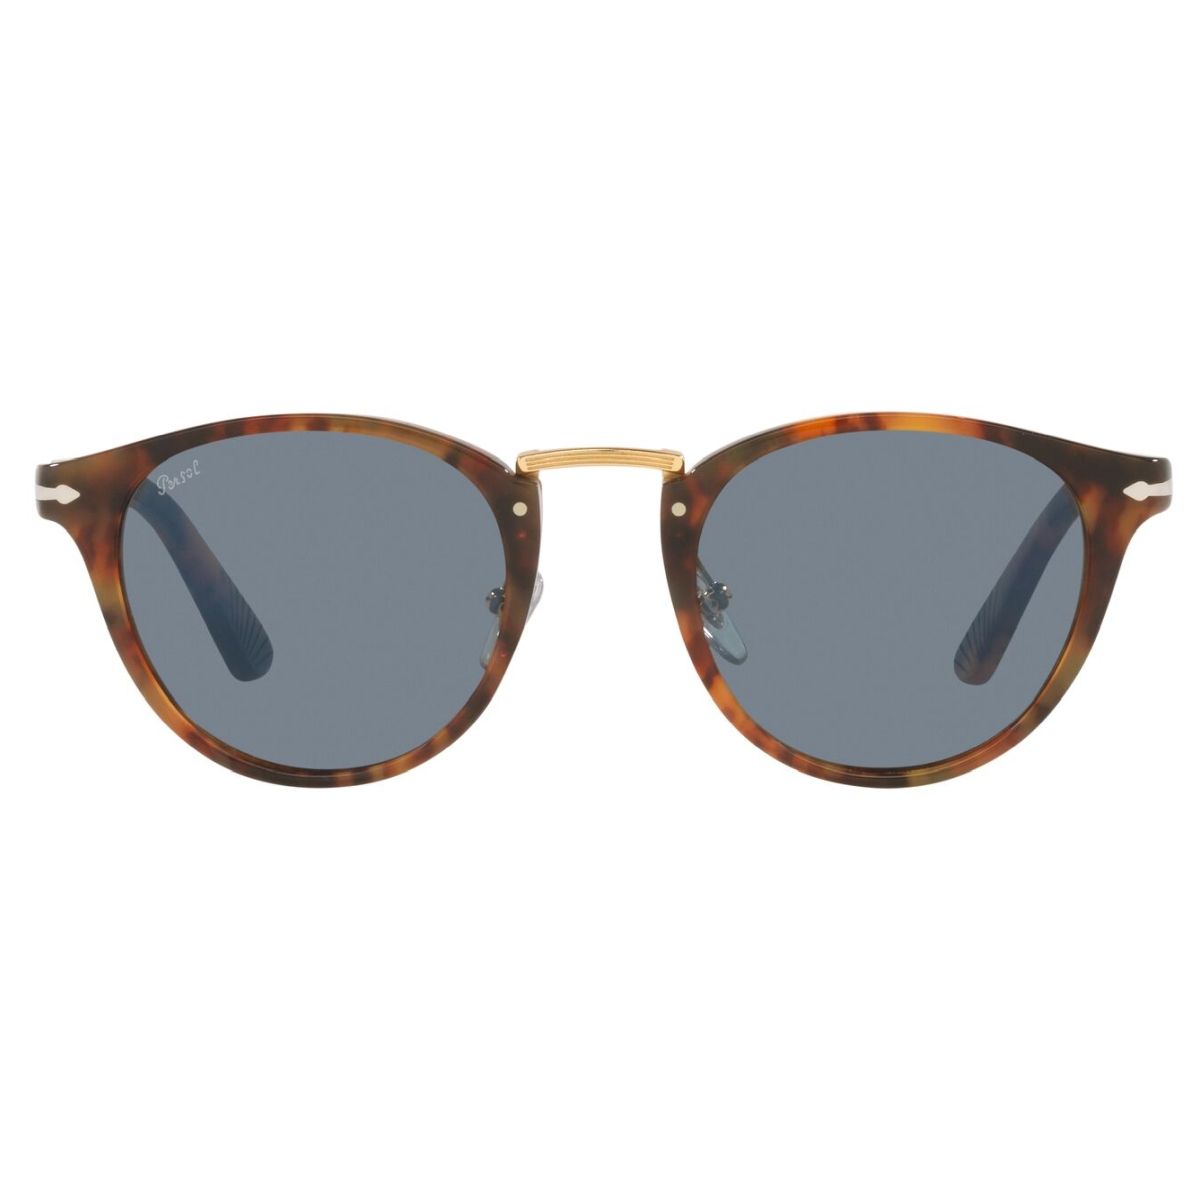 PERSOL 3108S/108/56/49